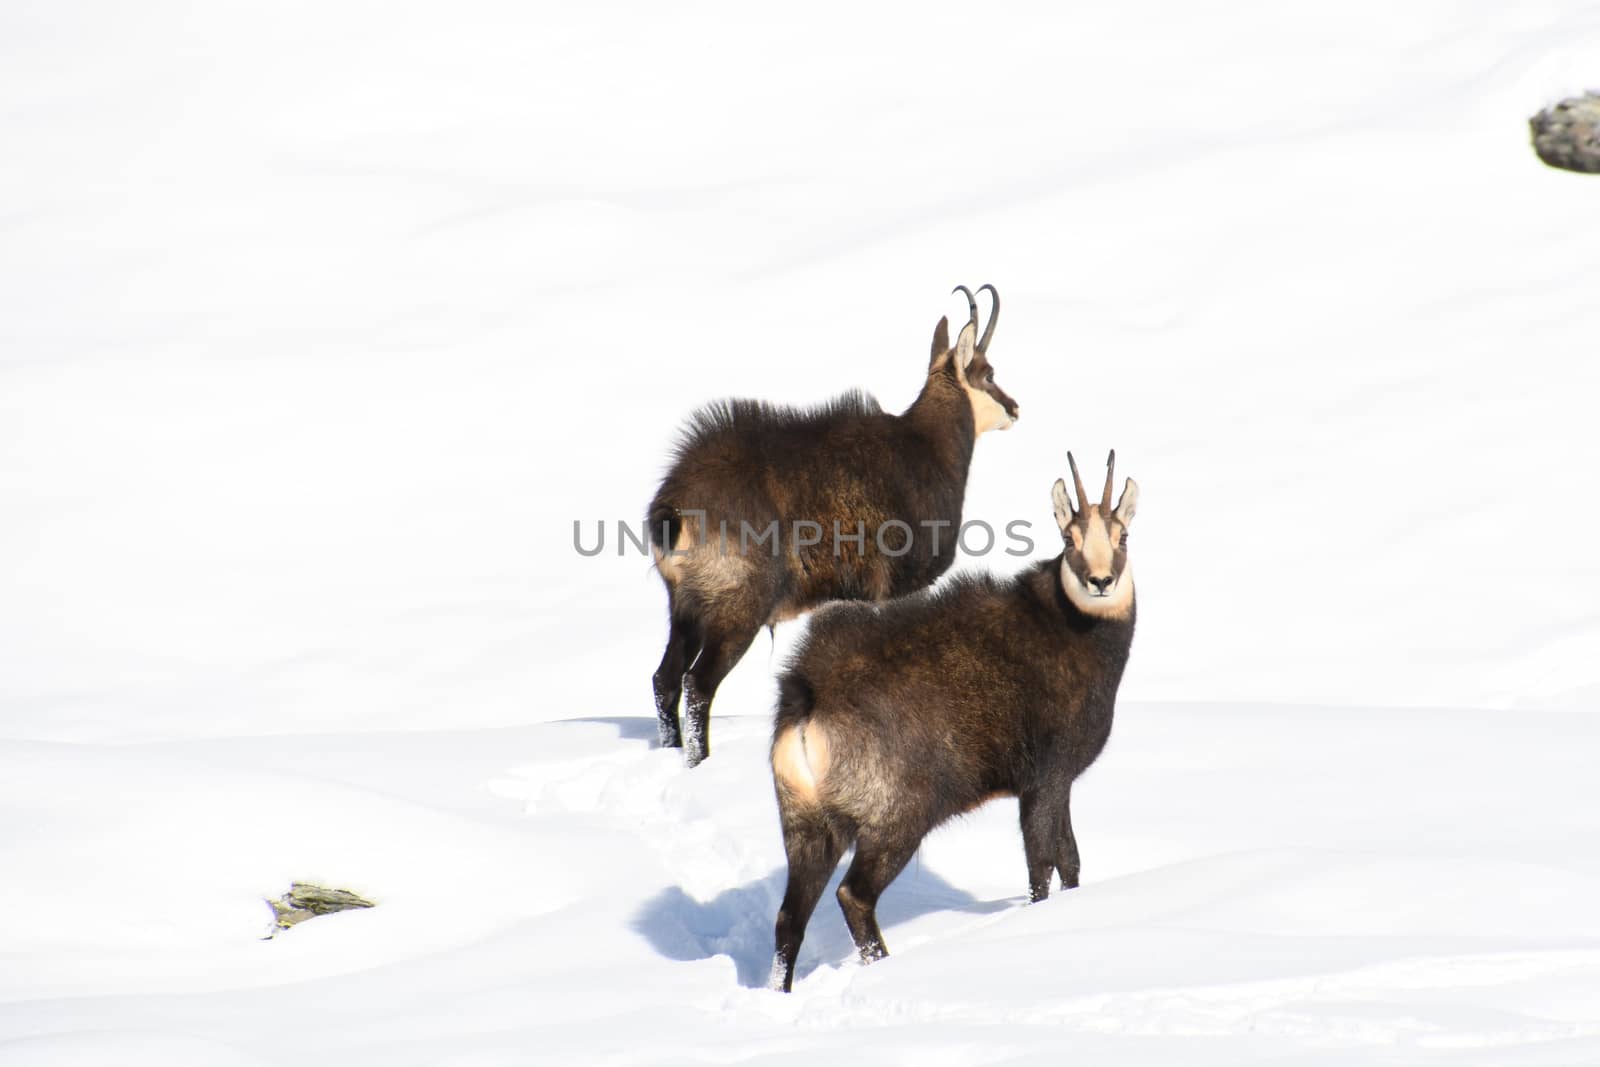 The chamois on the snow by bongia